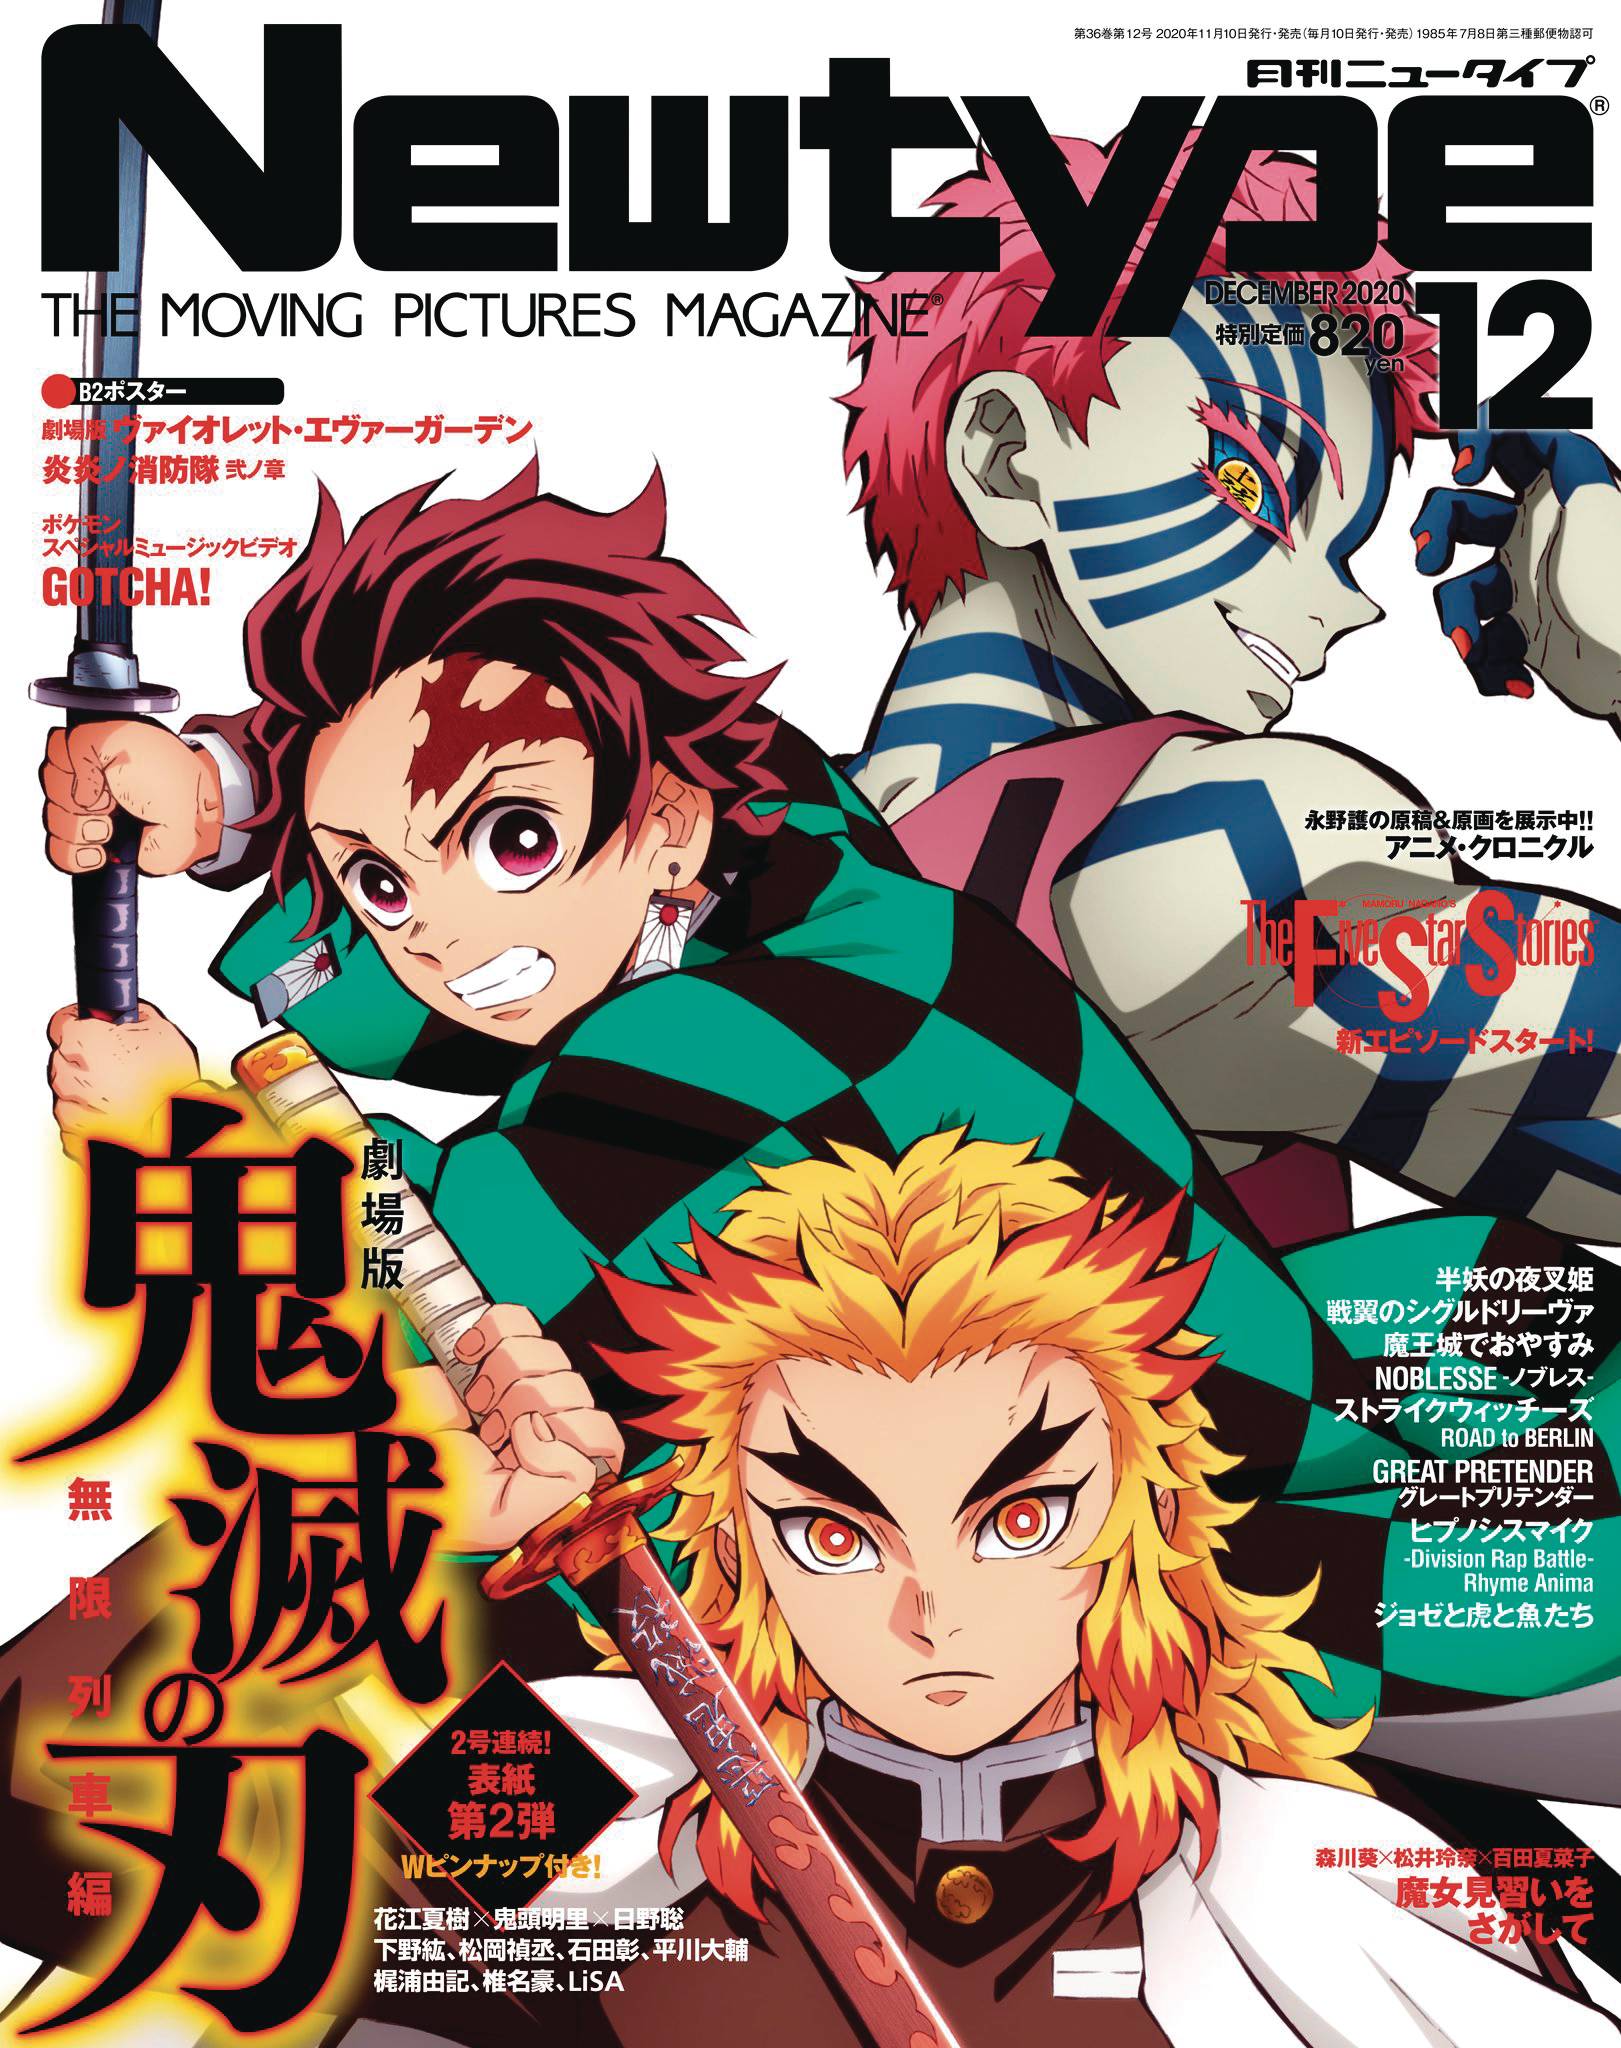 Feb Newtype May 21 Previews World